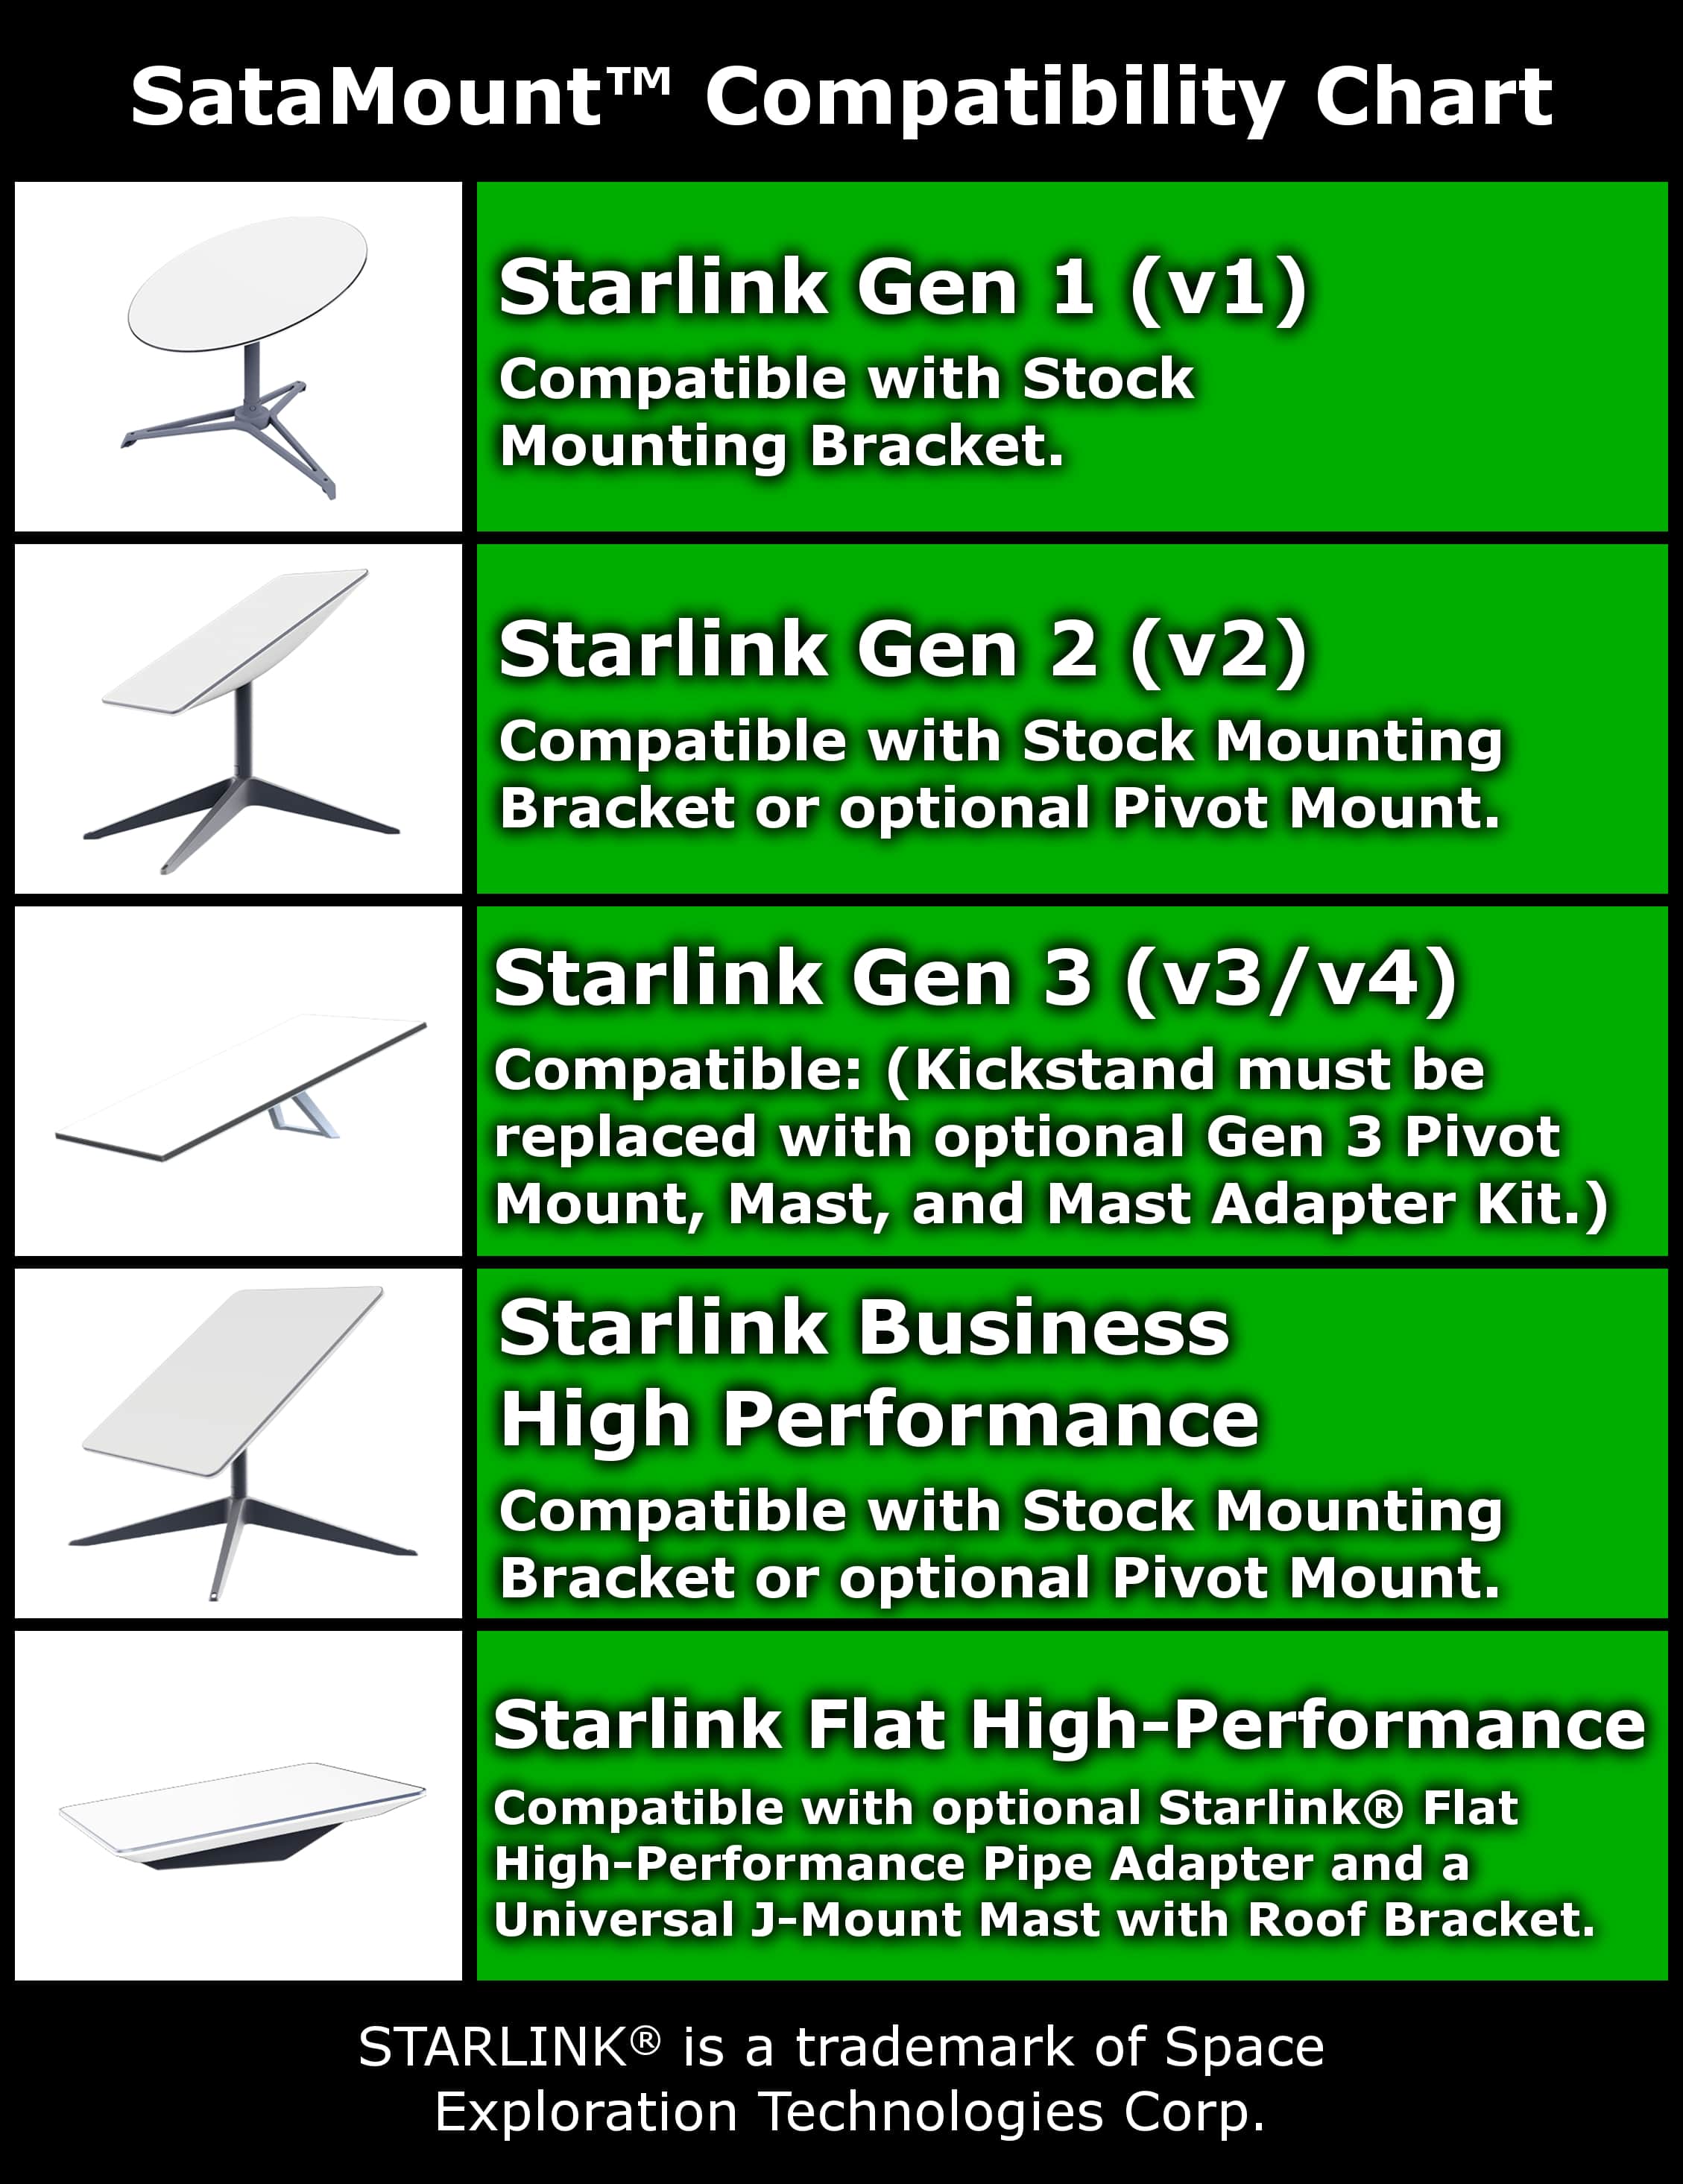 Satamount Compatibility Chart featuring 5 different Starlink Models and brief descriptions of what is needed to mount them to a metal roof with SataMount